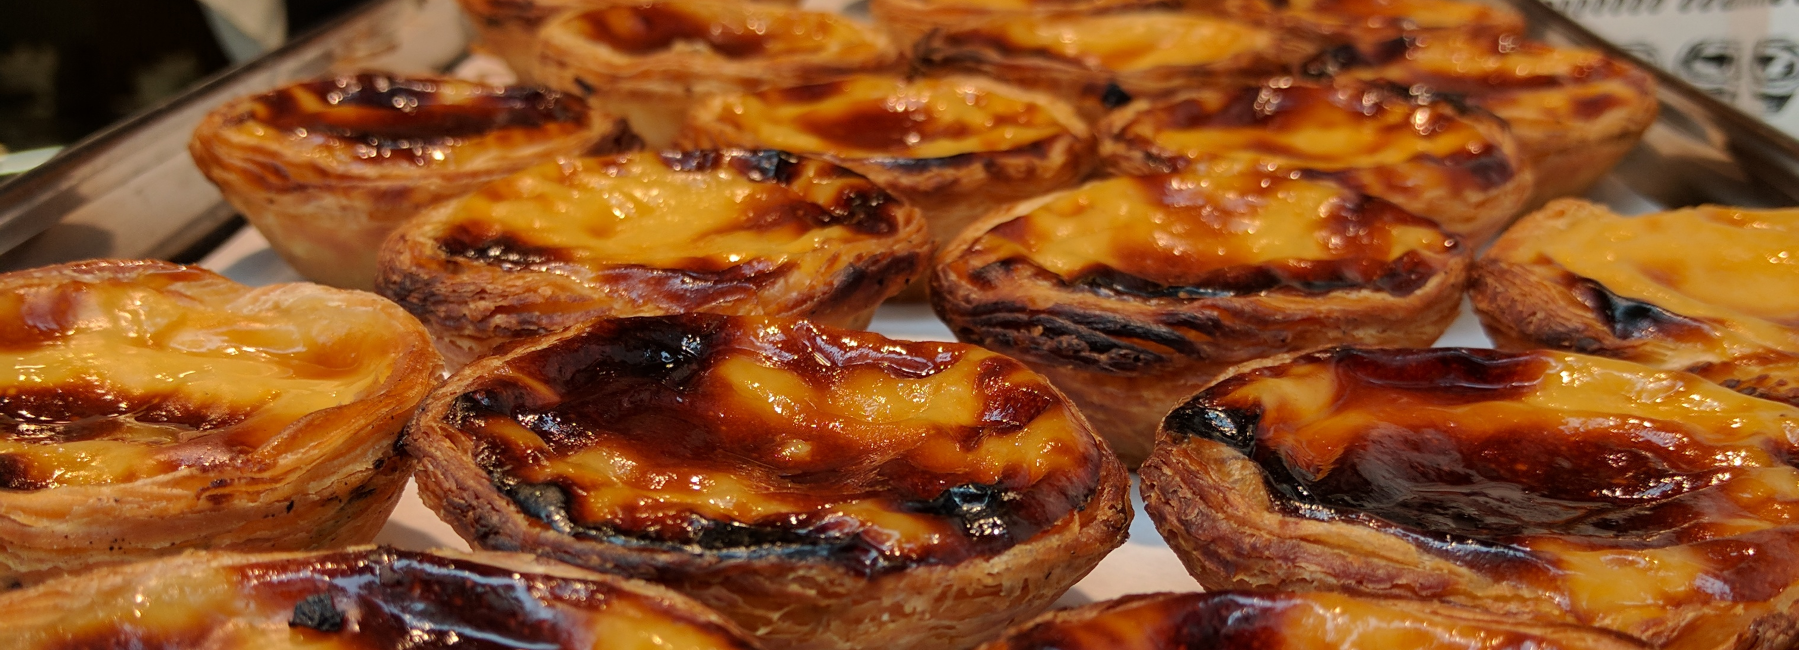 portuguese eggtart served in our gourmet food tours in Lisbon at Treasures of Lisboa